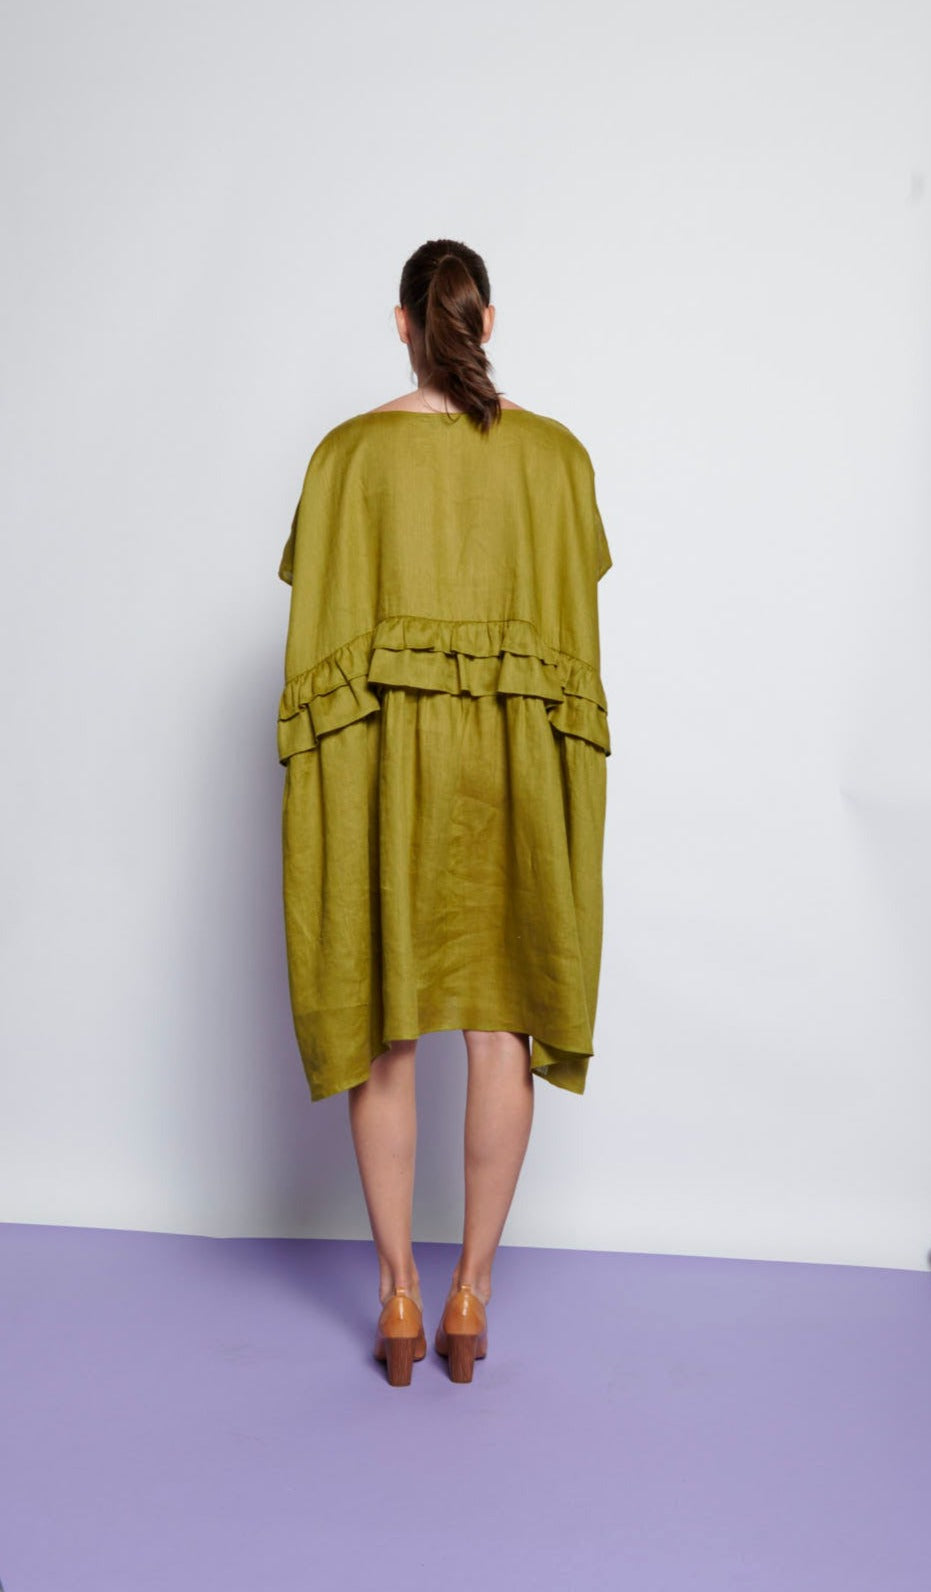 An easy-fit, knee-length tiered ruffle linen dress with round neckline and short sleeves in olive